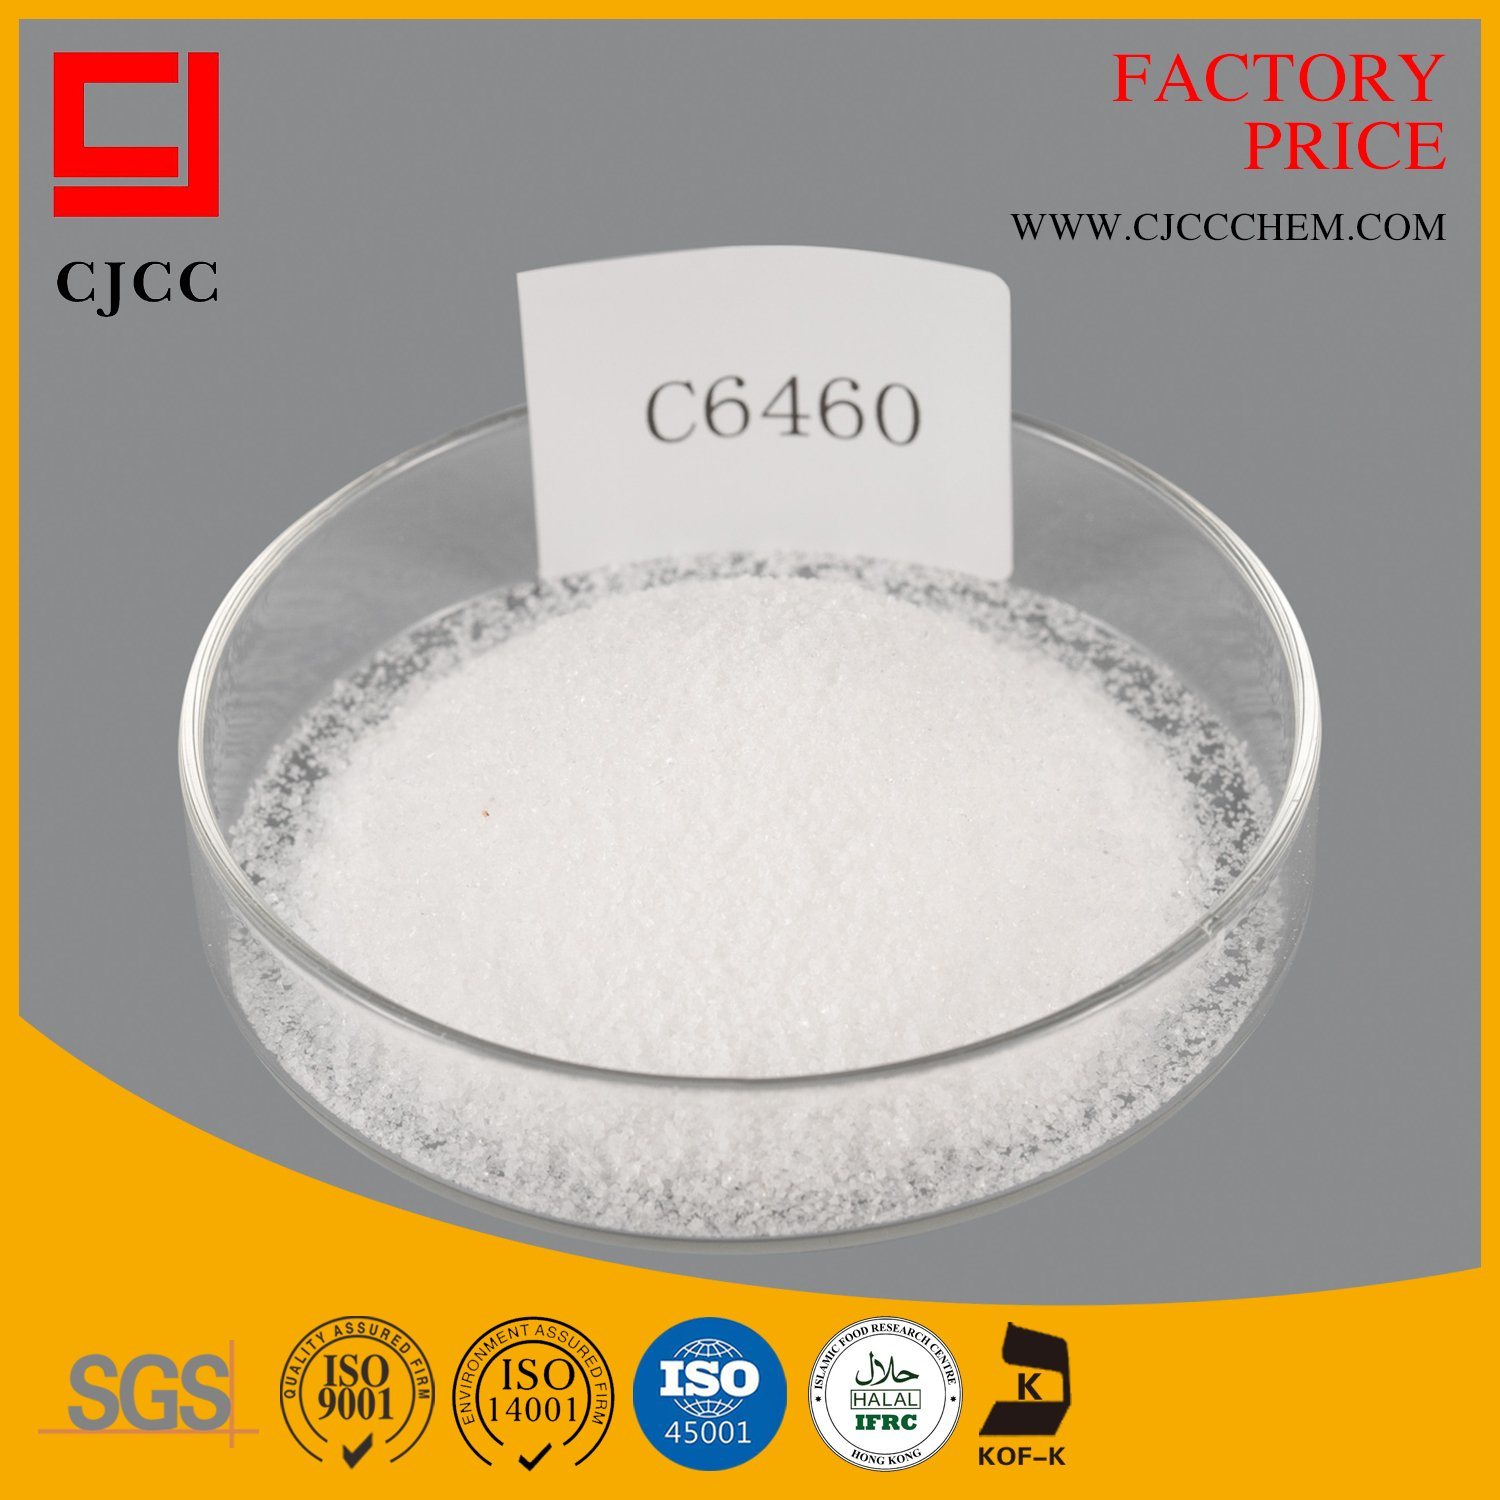 Anionic Polyacrylamide Flocculant for Papermaking Chemicals